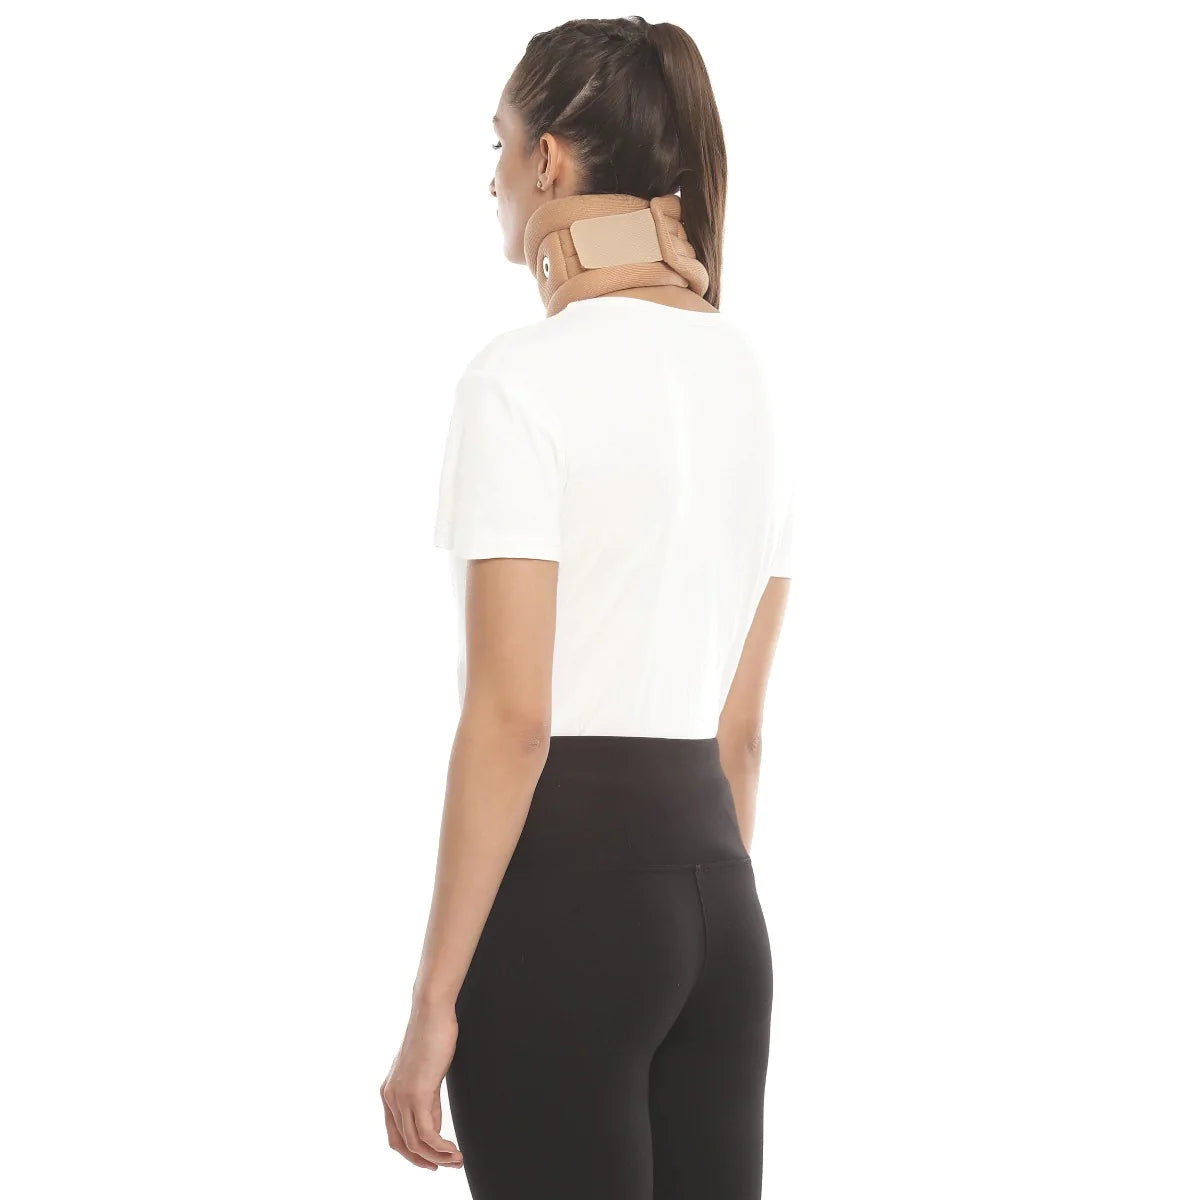 Cervical Collar Soft With Support (1 Pc/Pack)